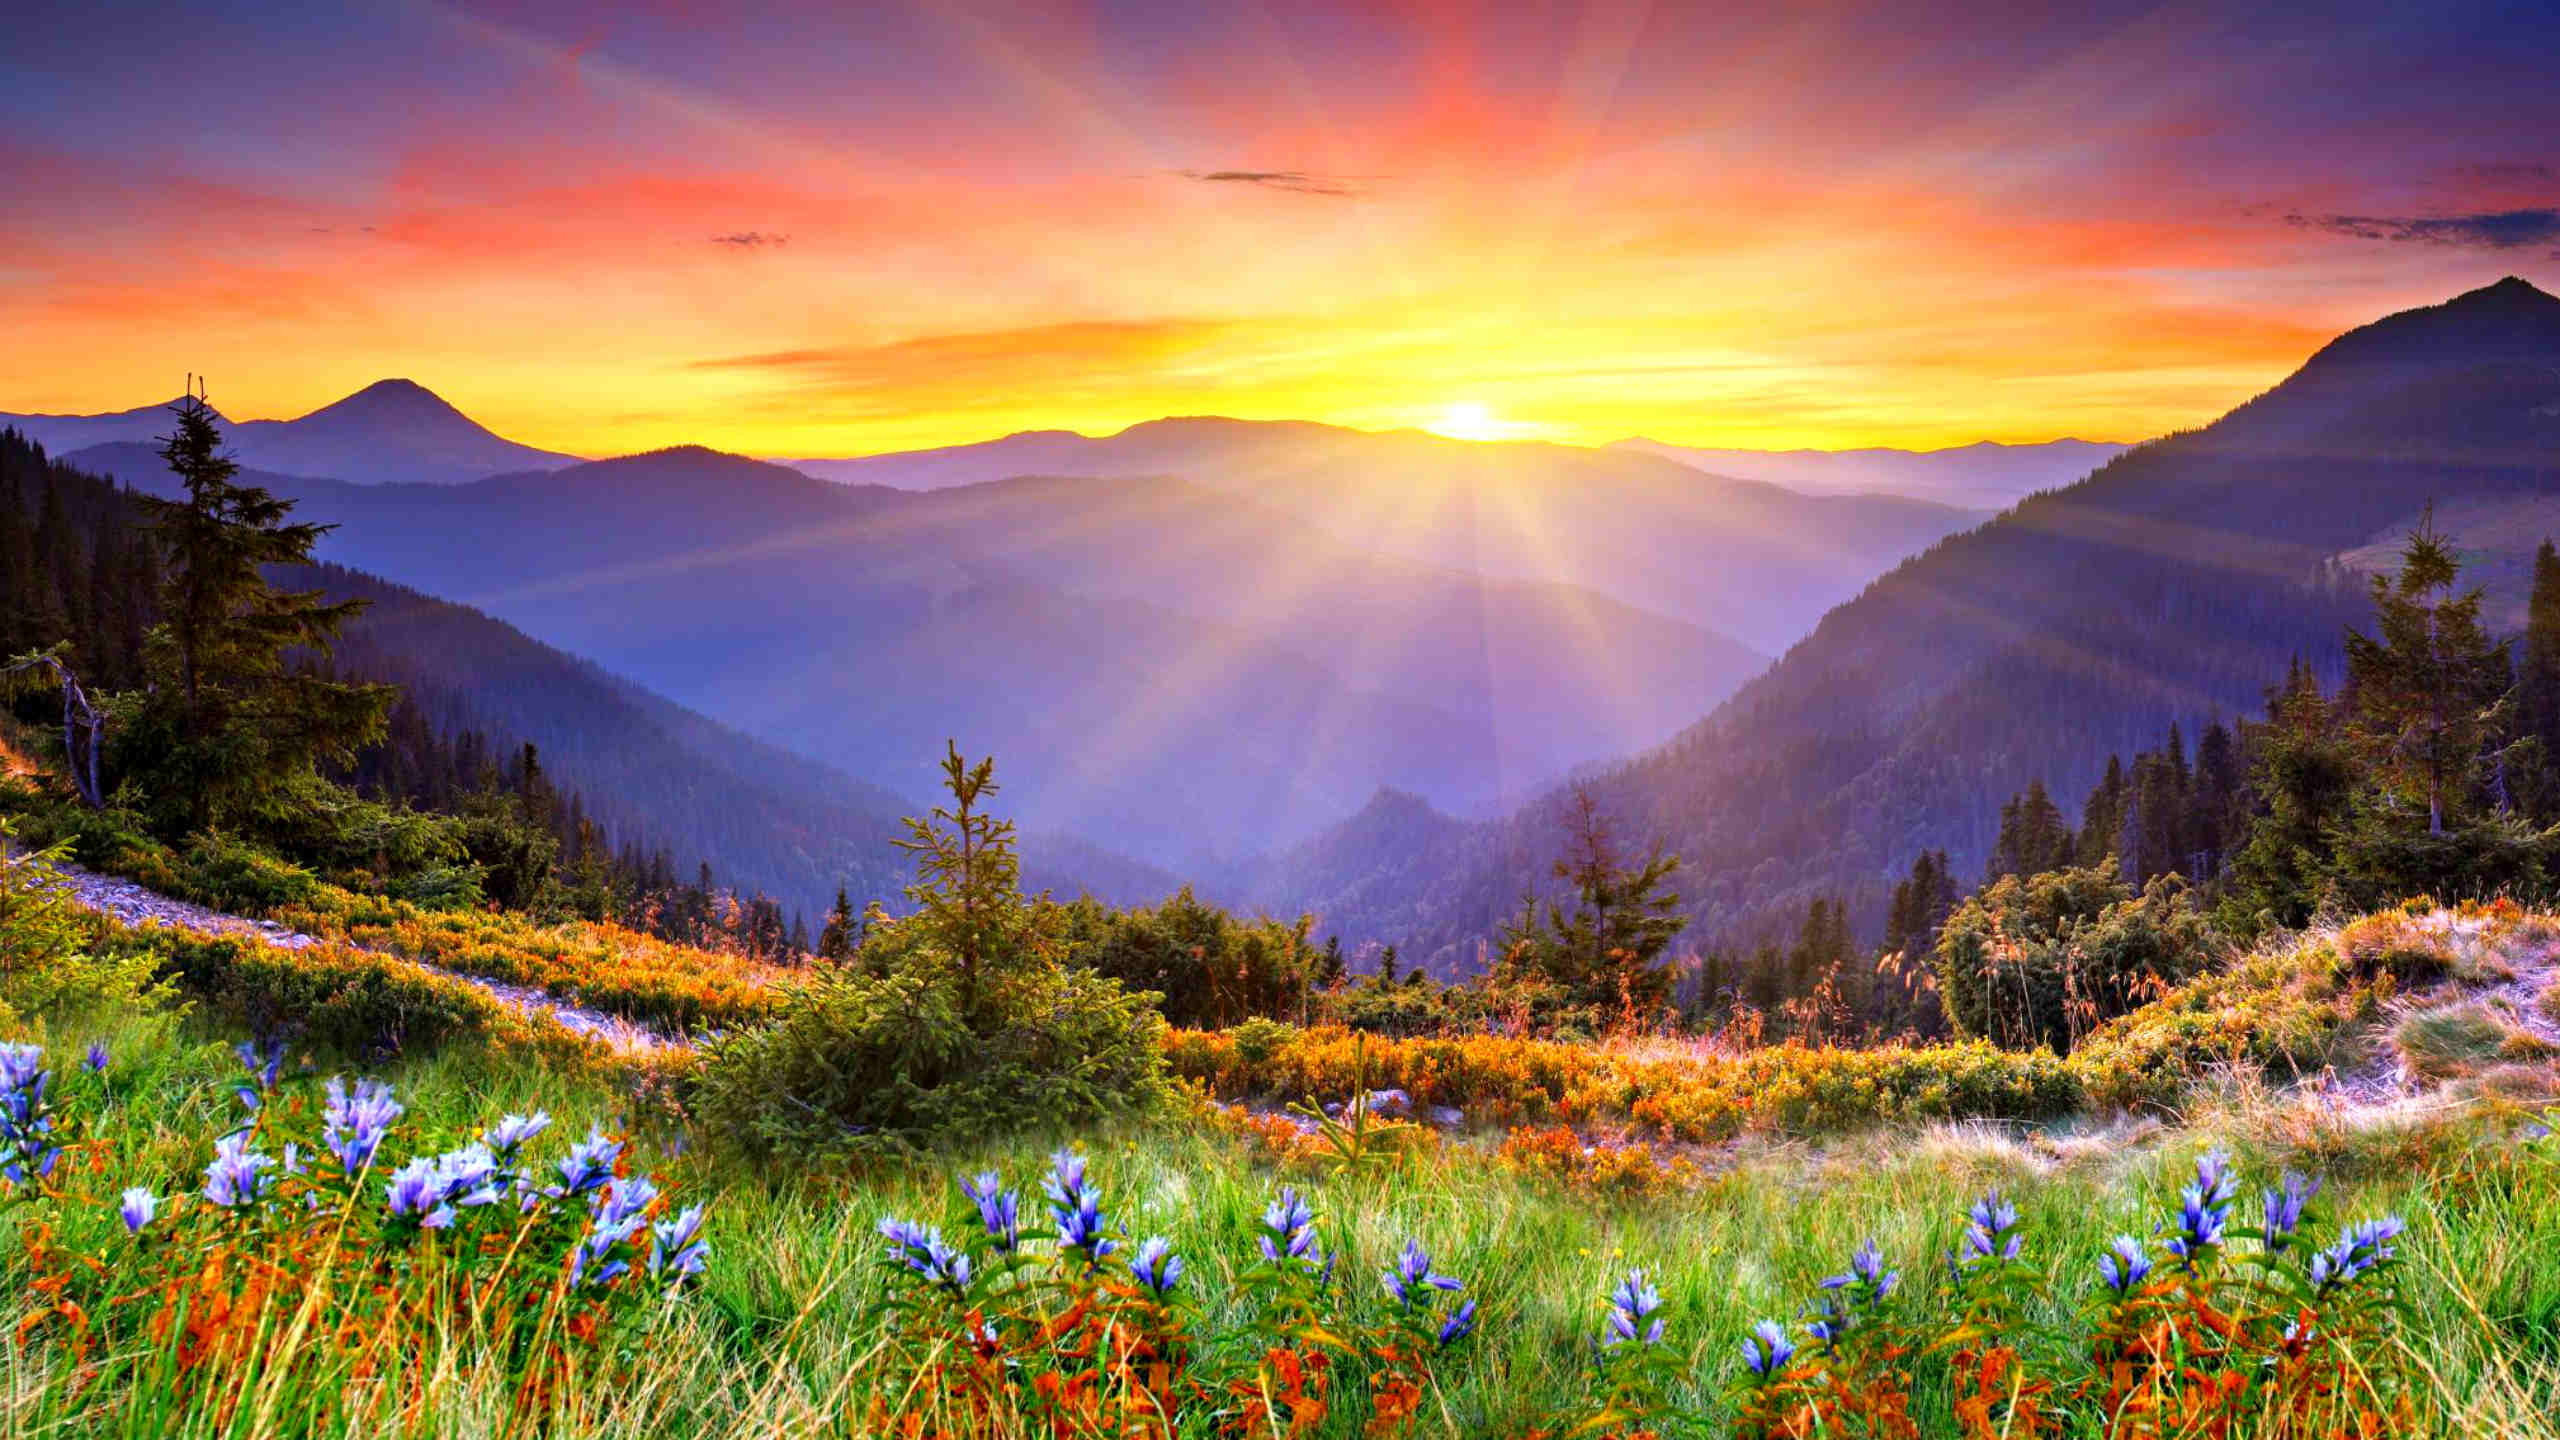 Awesome Sunset Sun Rays Forested Mountains, Beautiful Mountain Flowers With Green Grass Desktop Wallpaper Hd For Mobile Phones And Laptops